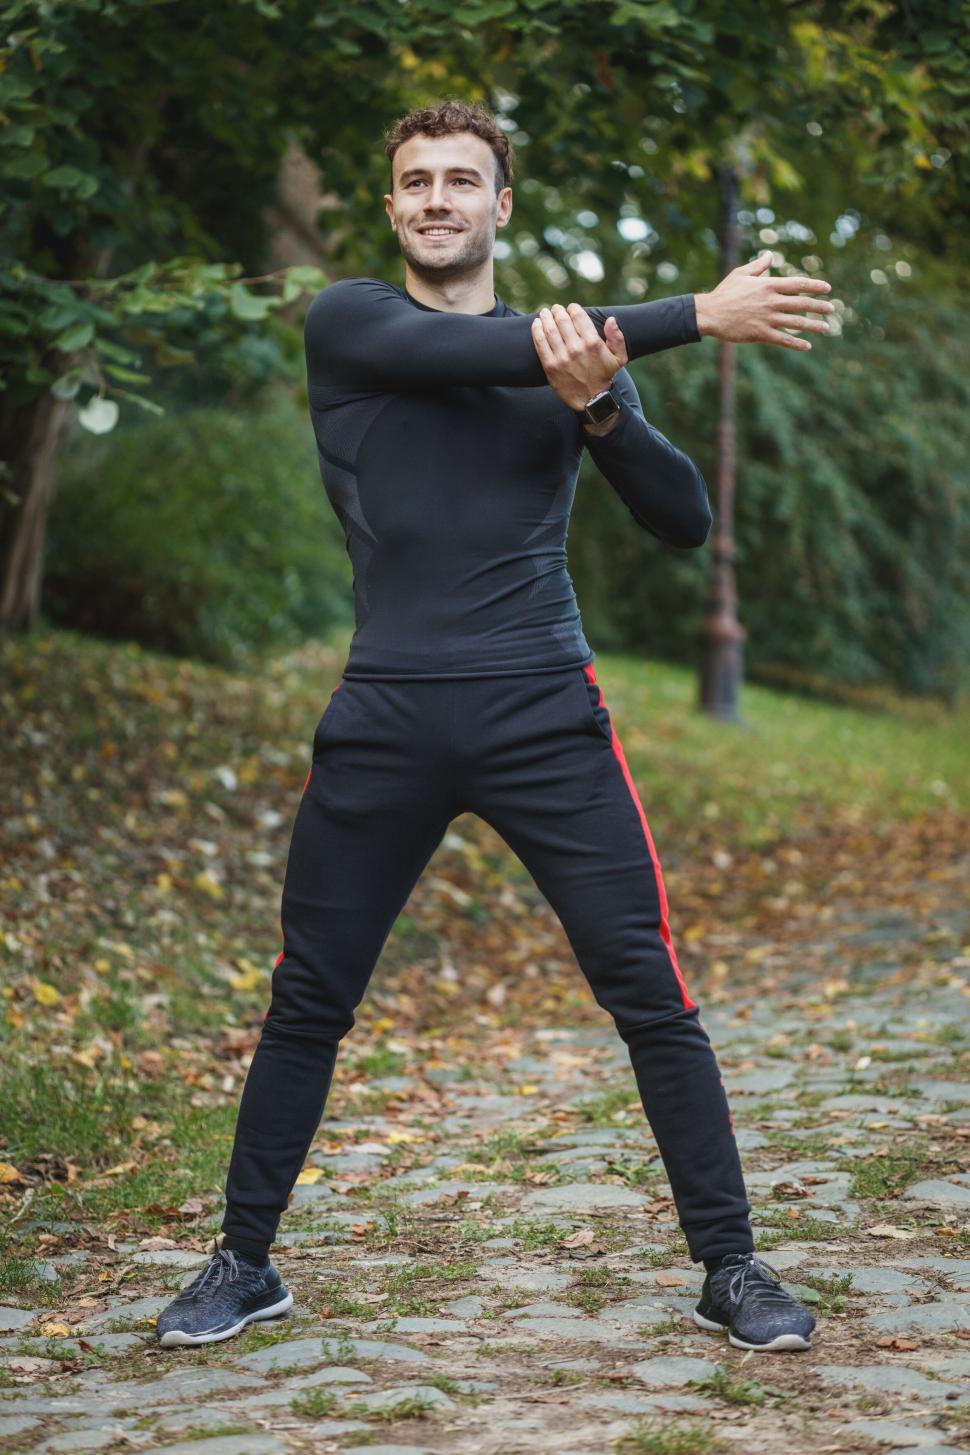 Free Image of Man stretching during outdoor workout 